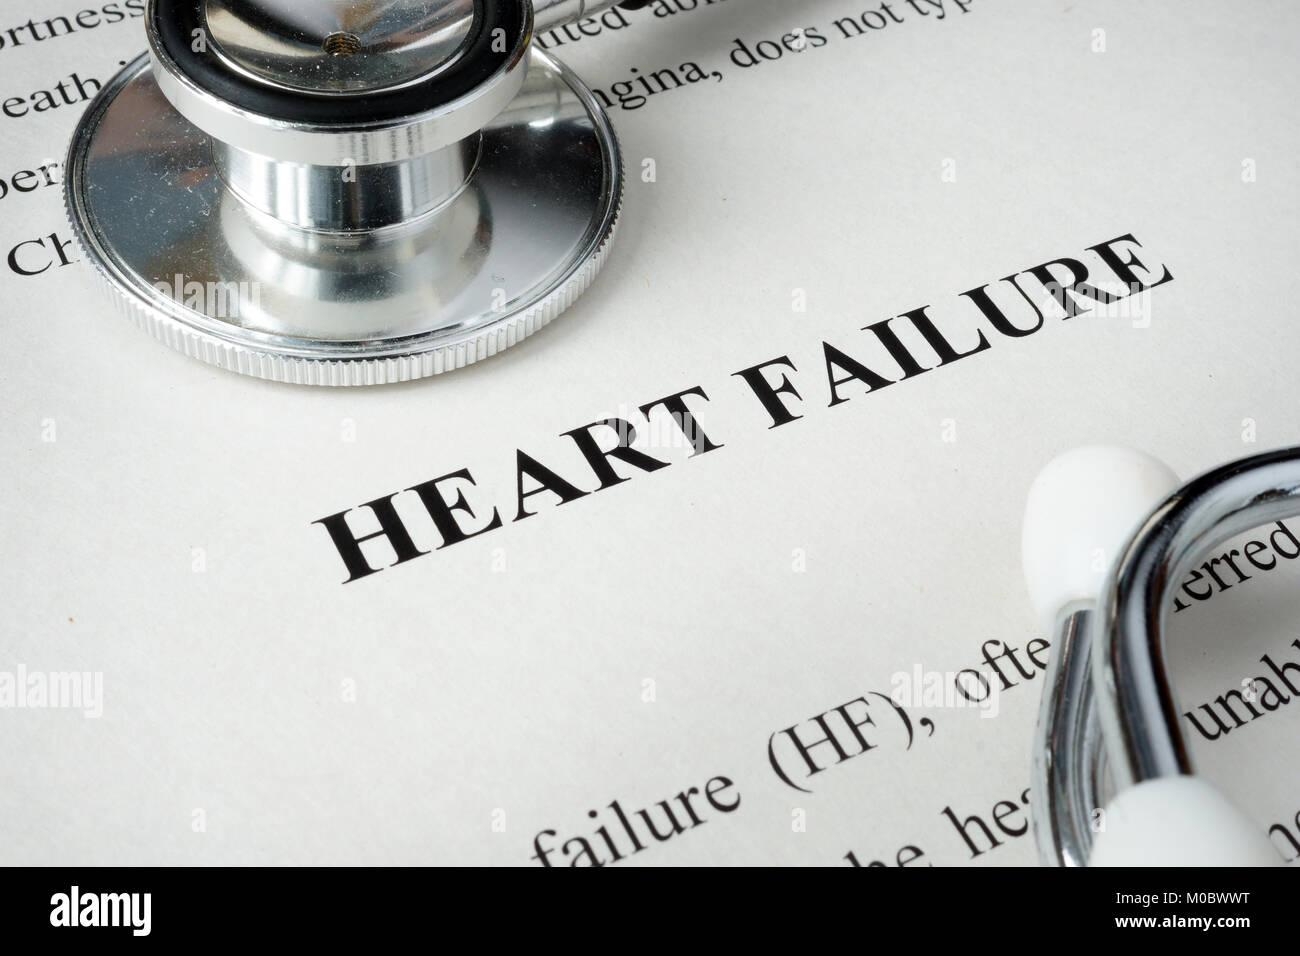 Information about Heart failure and glasses. Stock Photo